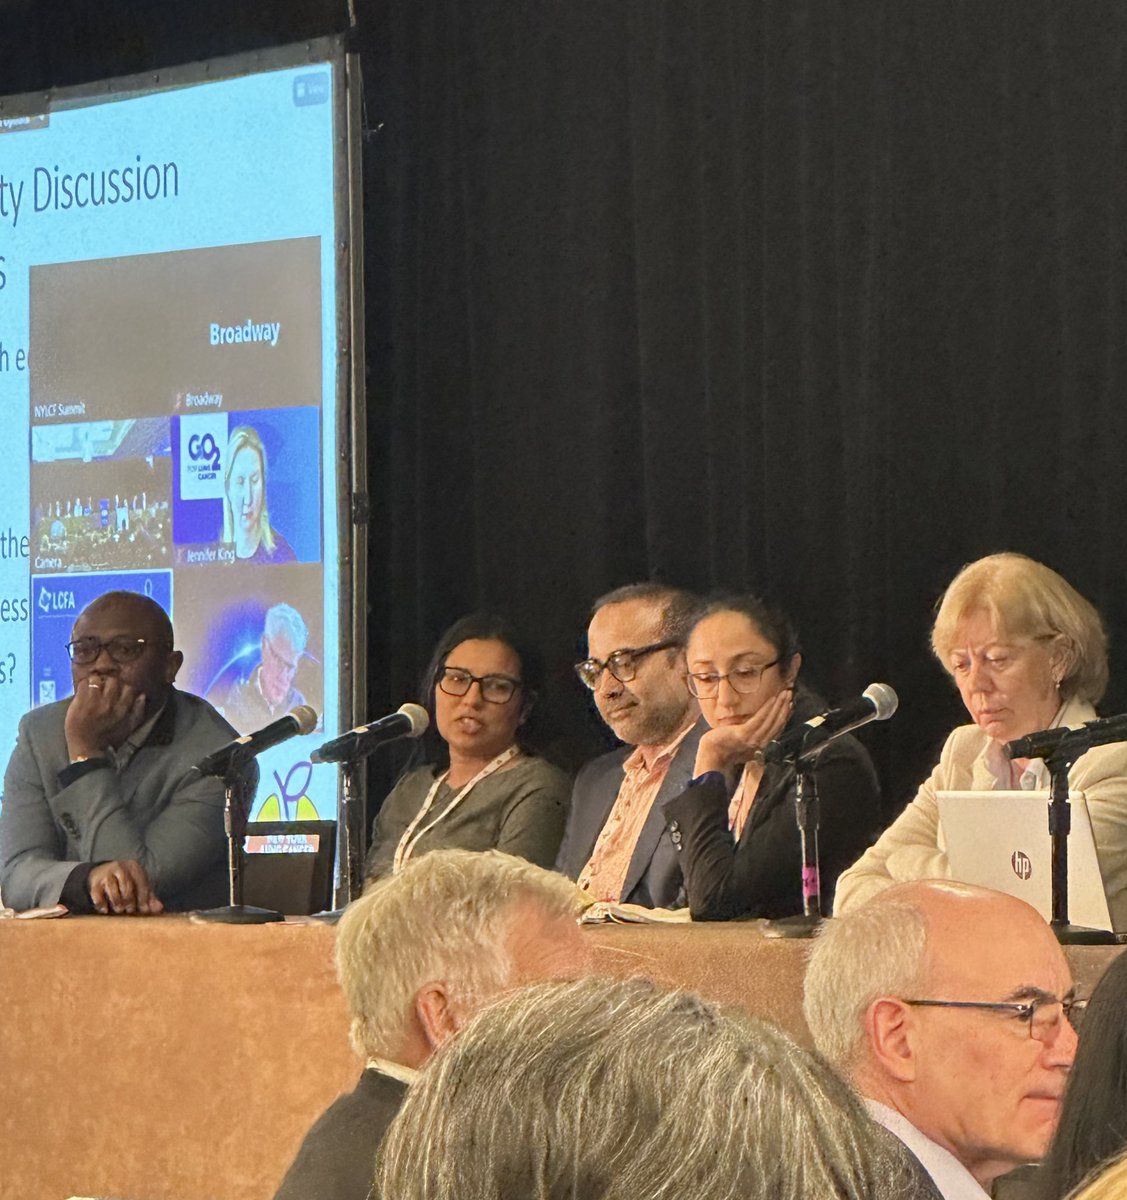 Insightful panel on diversity & disparities. Dr. @ROsarogiagbon explains “you cannot change what you do not measure.” Dr. @EnriquetaFelip highlights differences in access across Europe. Dr. @SukiPaddaMD - we must address the lack of diversity in the oncology workforce. #NYLCF23